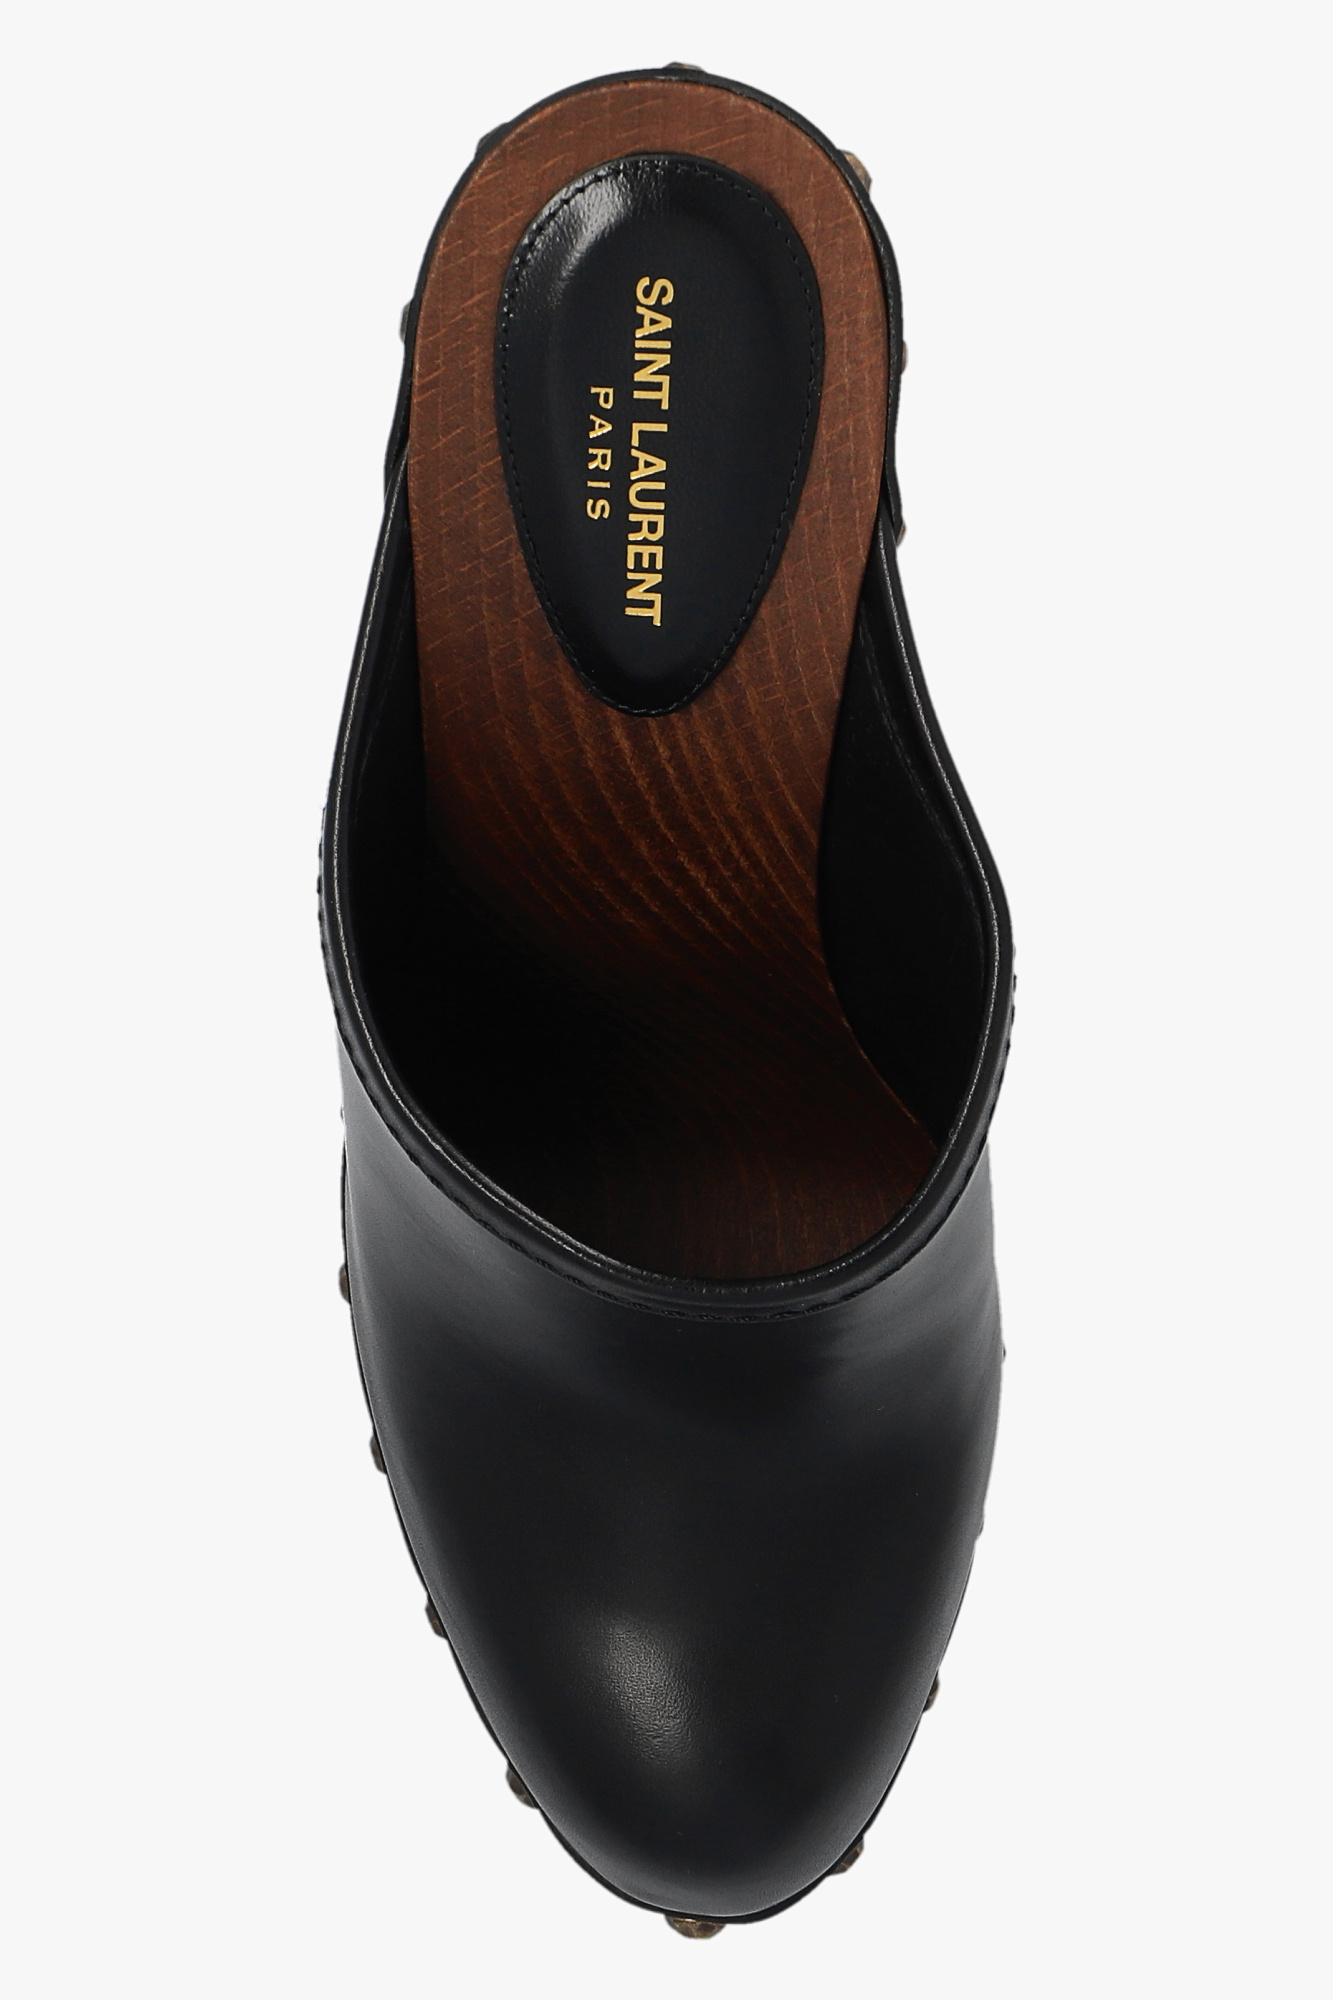 Saint Laurent Joan Platform Clogs in Smooth Leather and Wood - Black - Women - 6